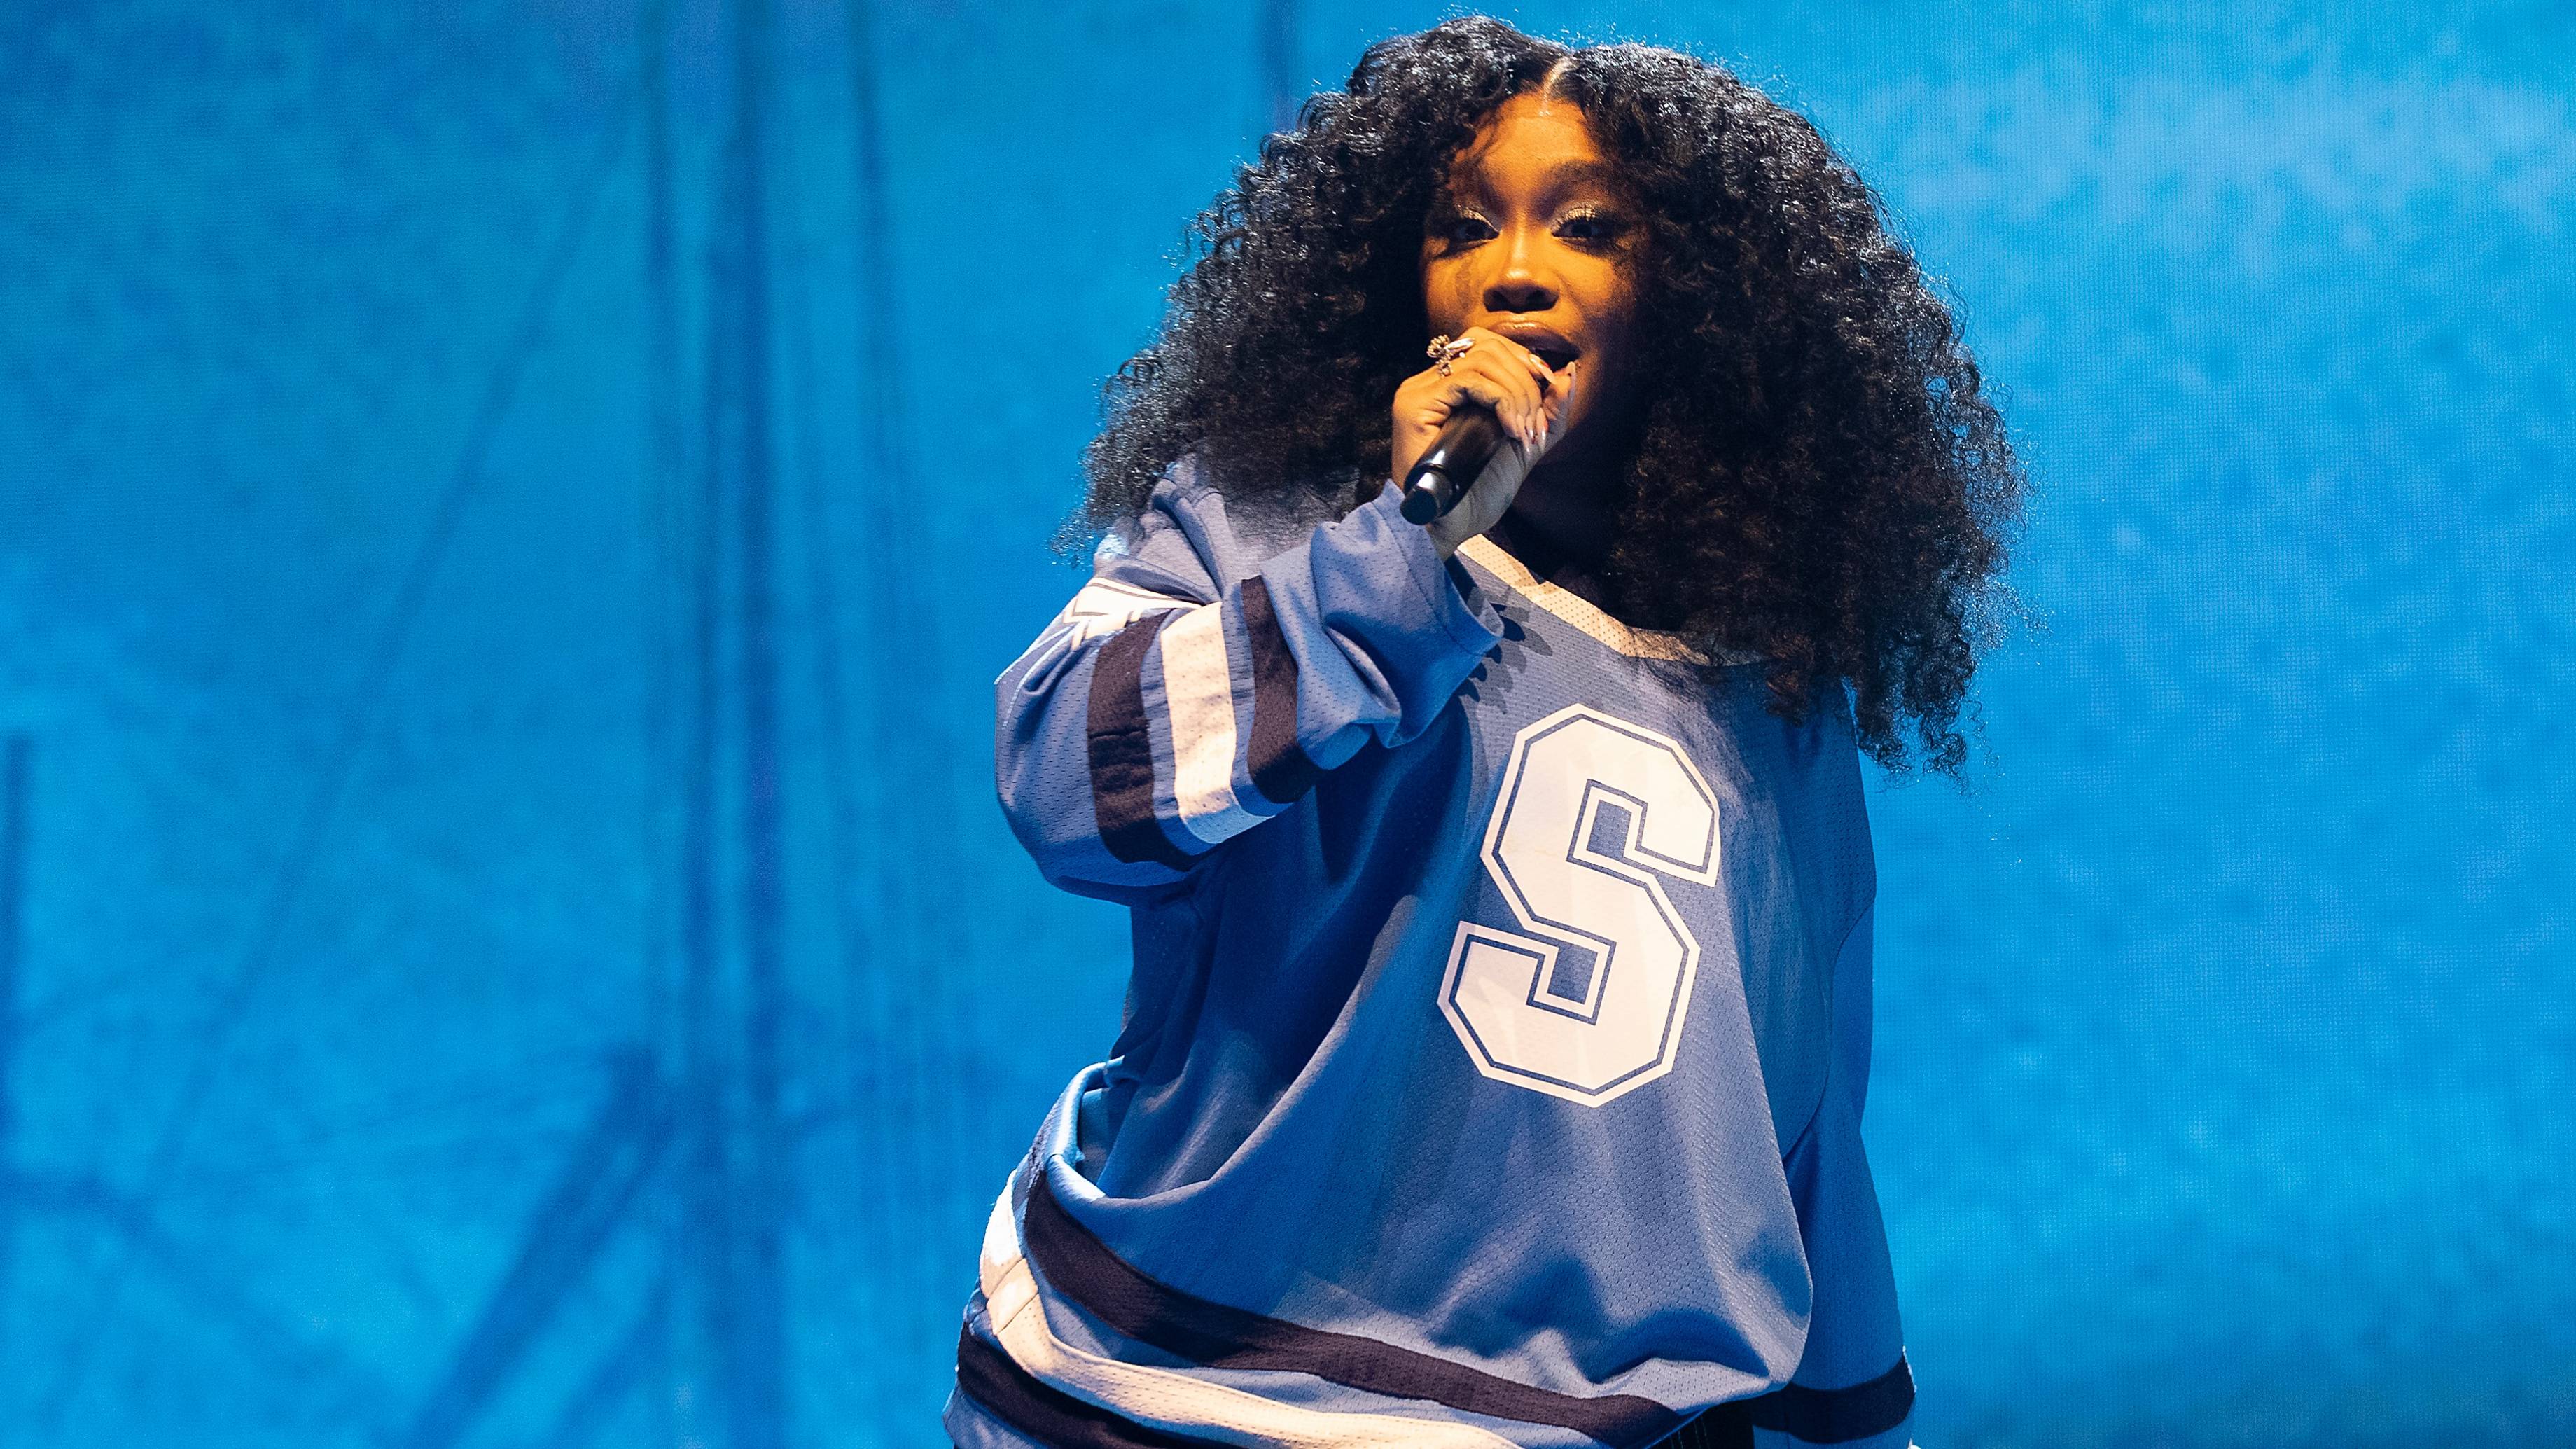 SZA, Shirt: The Best Beauty Looks from the Viral Music Video